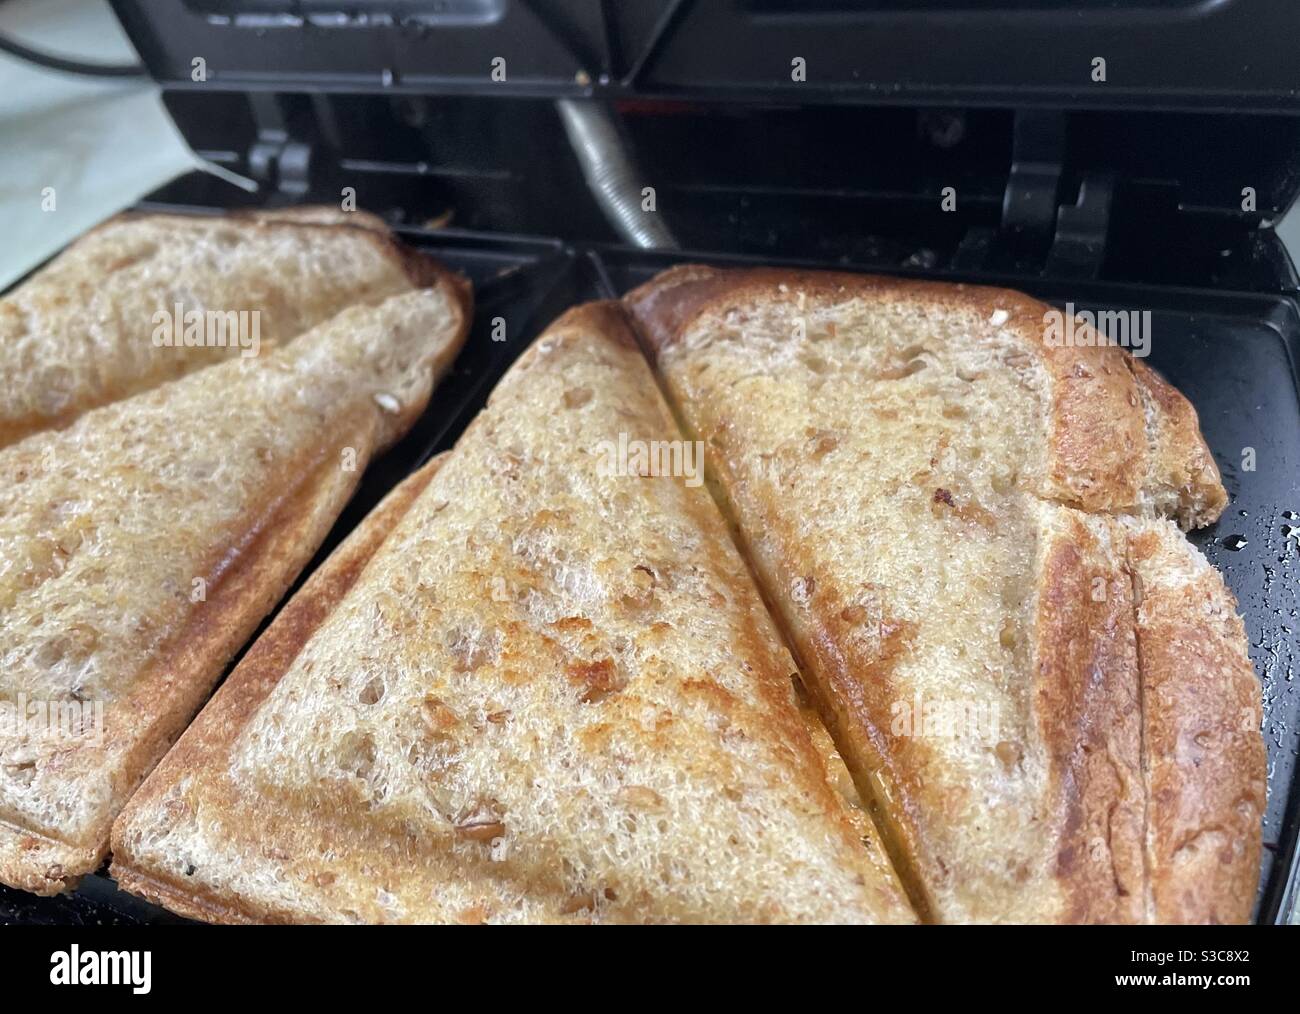 A classic toasted cheese sandwich being made in a toasted sandwich maker. Stock Photo